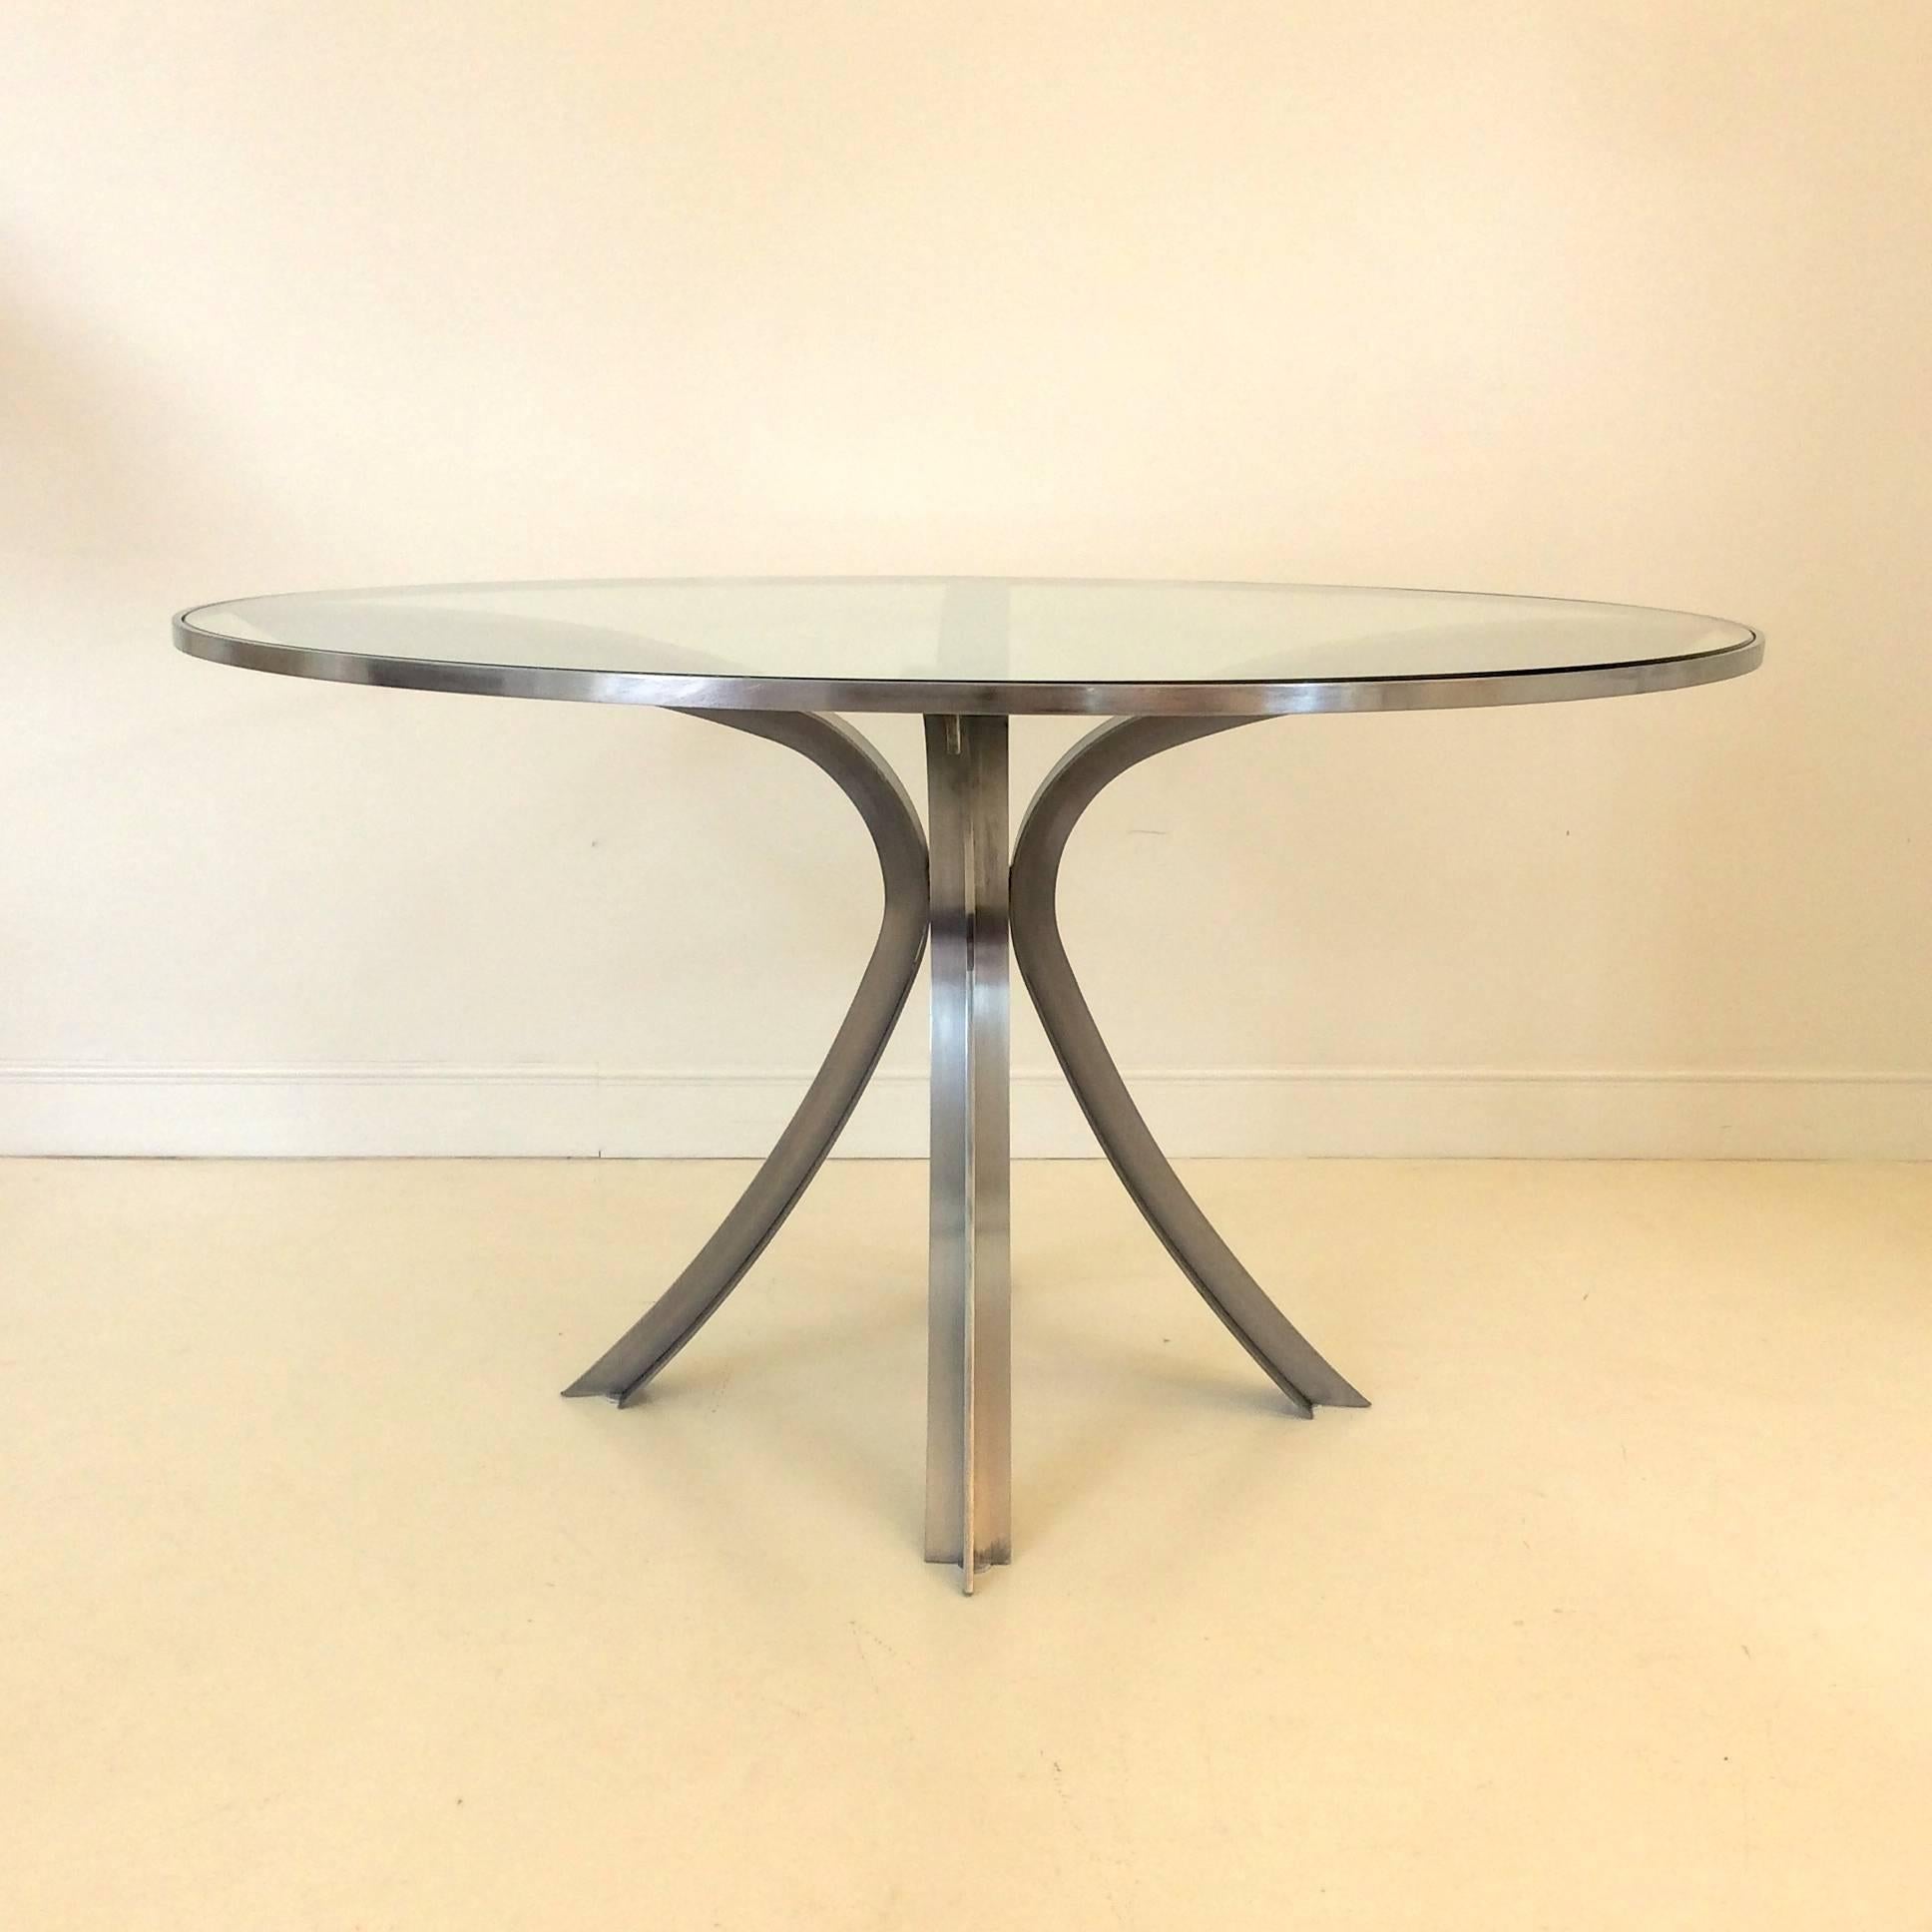 French Xavier Feal Round Table, Brushed Steel, circa 1970, France